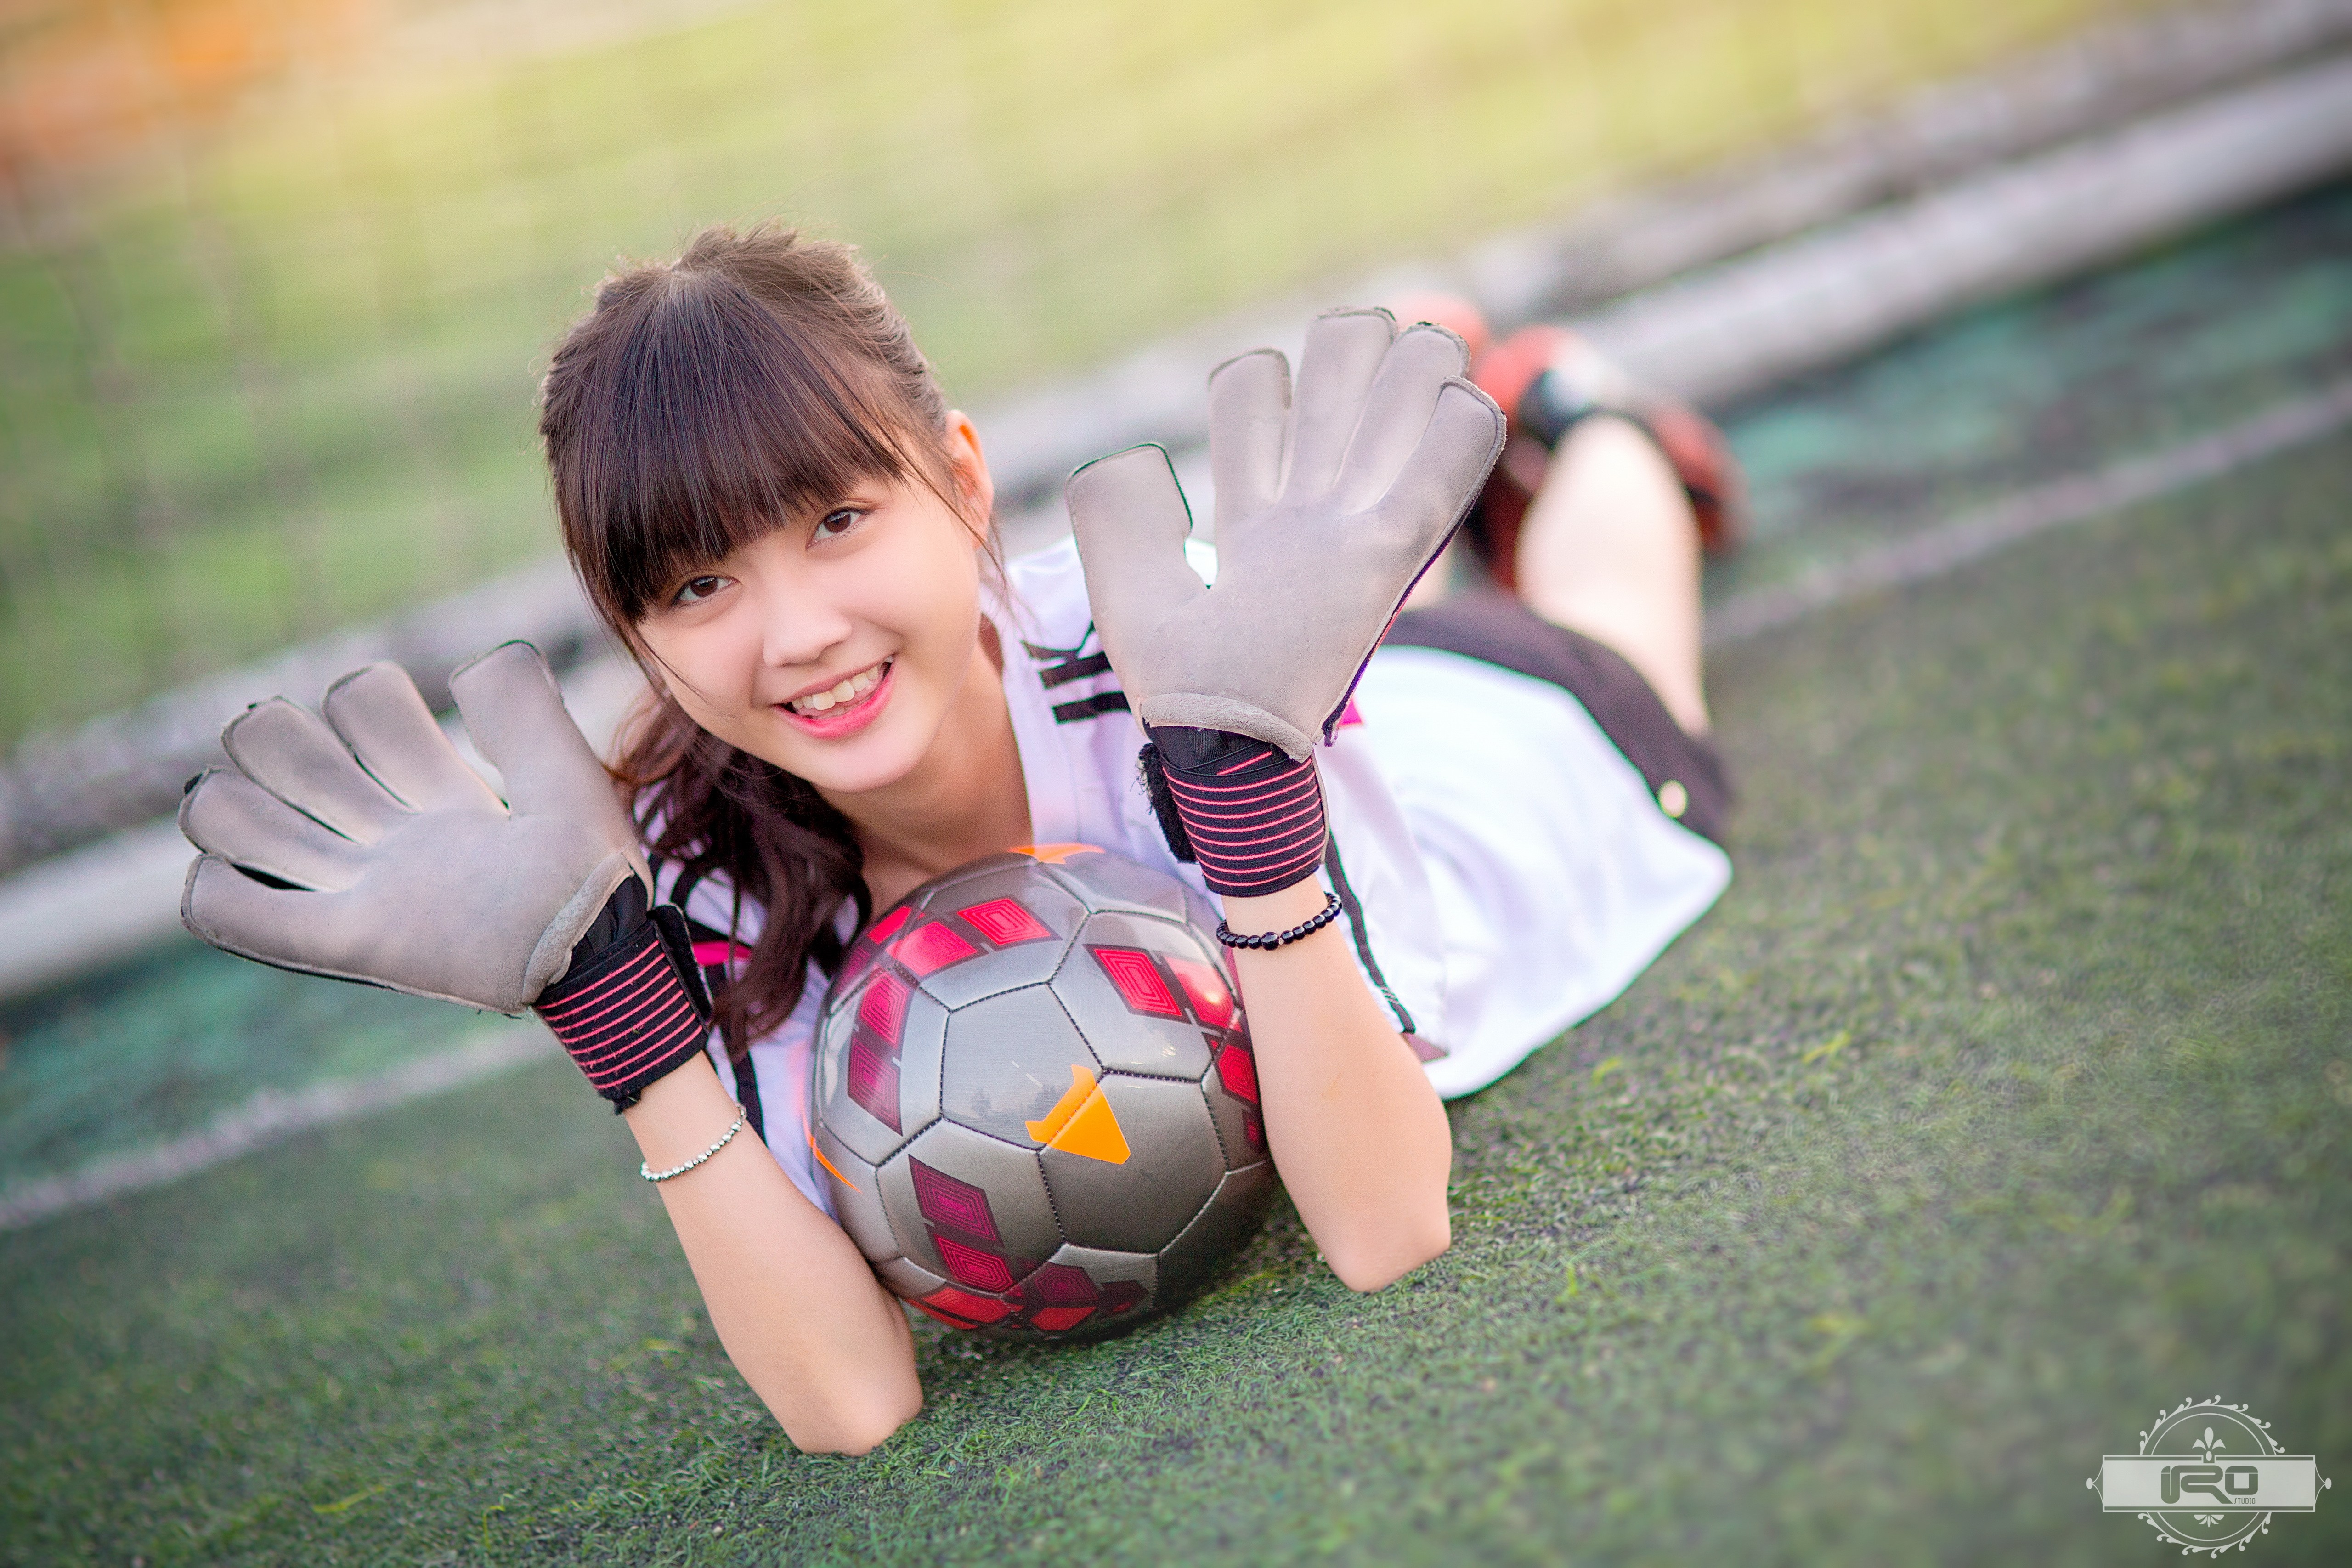 People 5120x3413 smiling ball lying on front women soccer field soccer girls gloves soccer ball Asian model grass women outdoors watermarked looking at viewer brunette